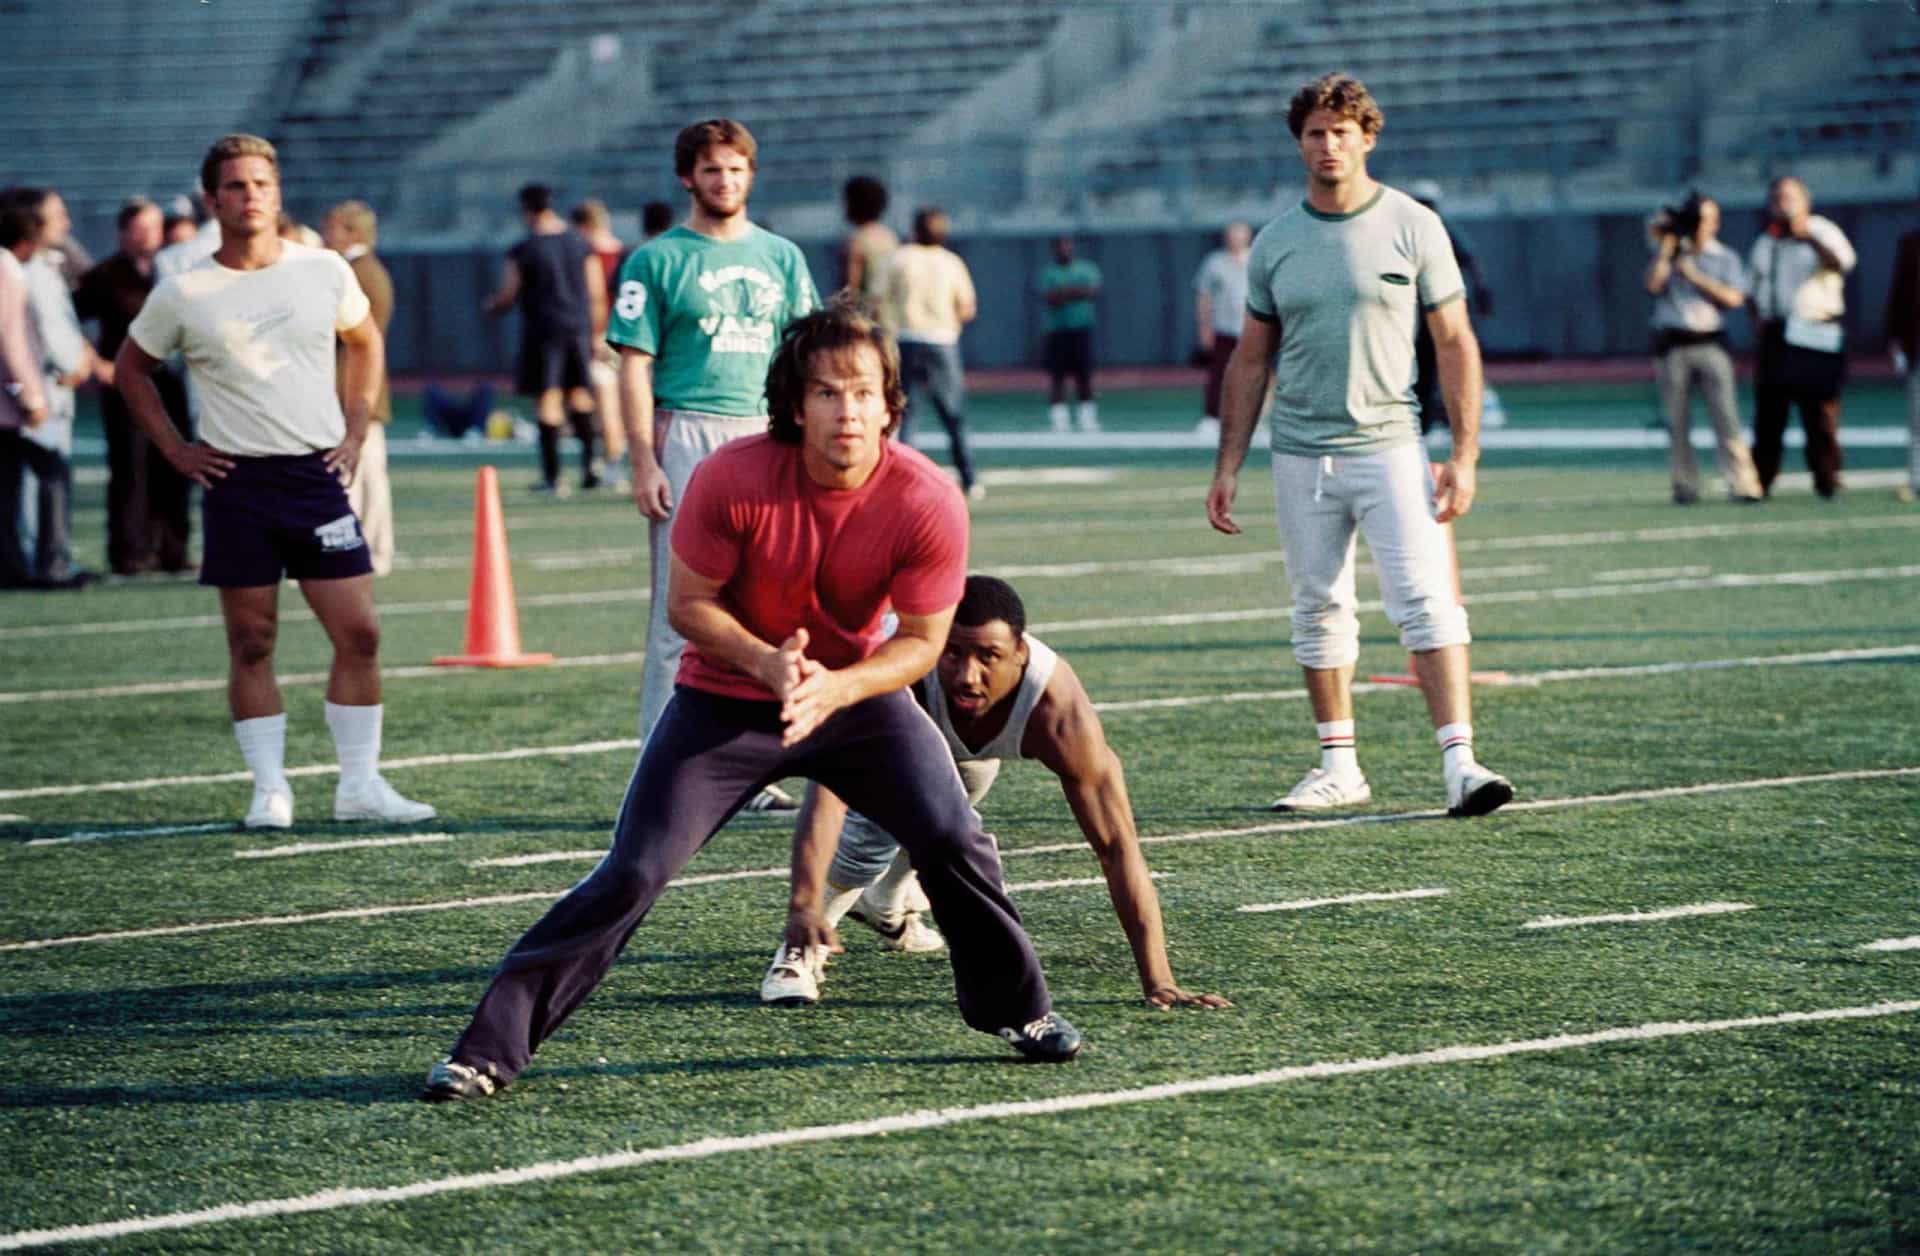 <p>In the 2006 film with the same title, we have Mark Wahlberg playing the main character in the biopic of American football player Vince Papale.</p><p>You may also like:<a href="https://www.starsinsider.com/n/501666?utm_source=msn.com&utm_medium=display&utm_campaign=referral_description&utm_content=519875en-us"> What would happen to Earth if humans went extinct?</a></p>